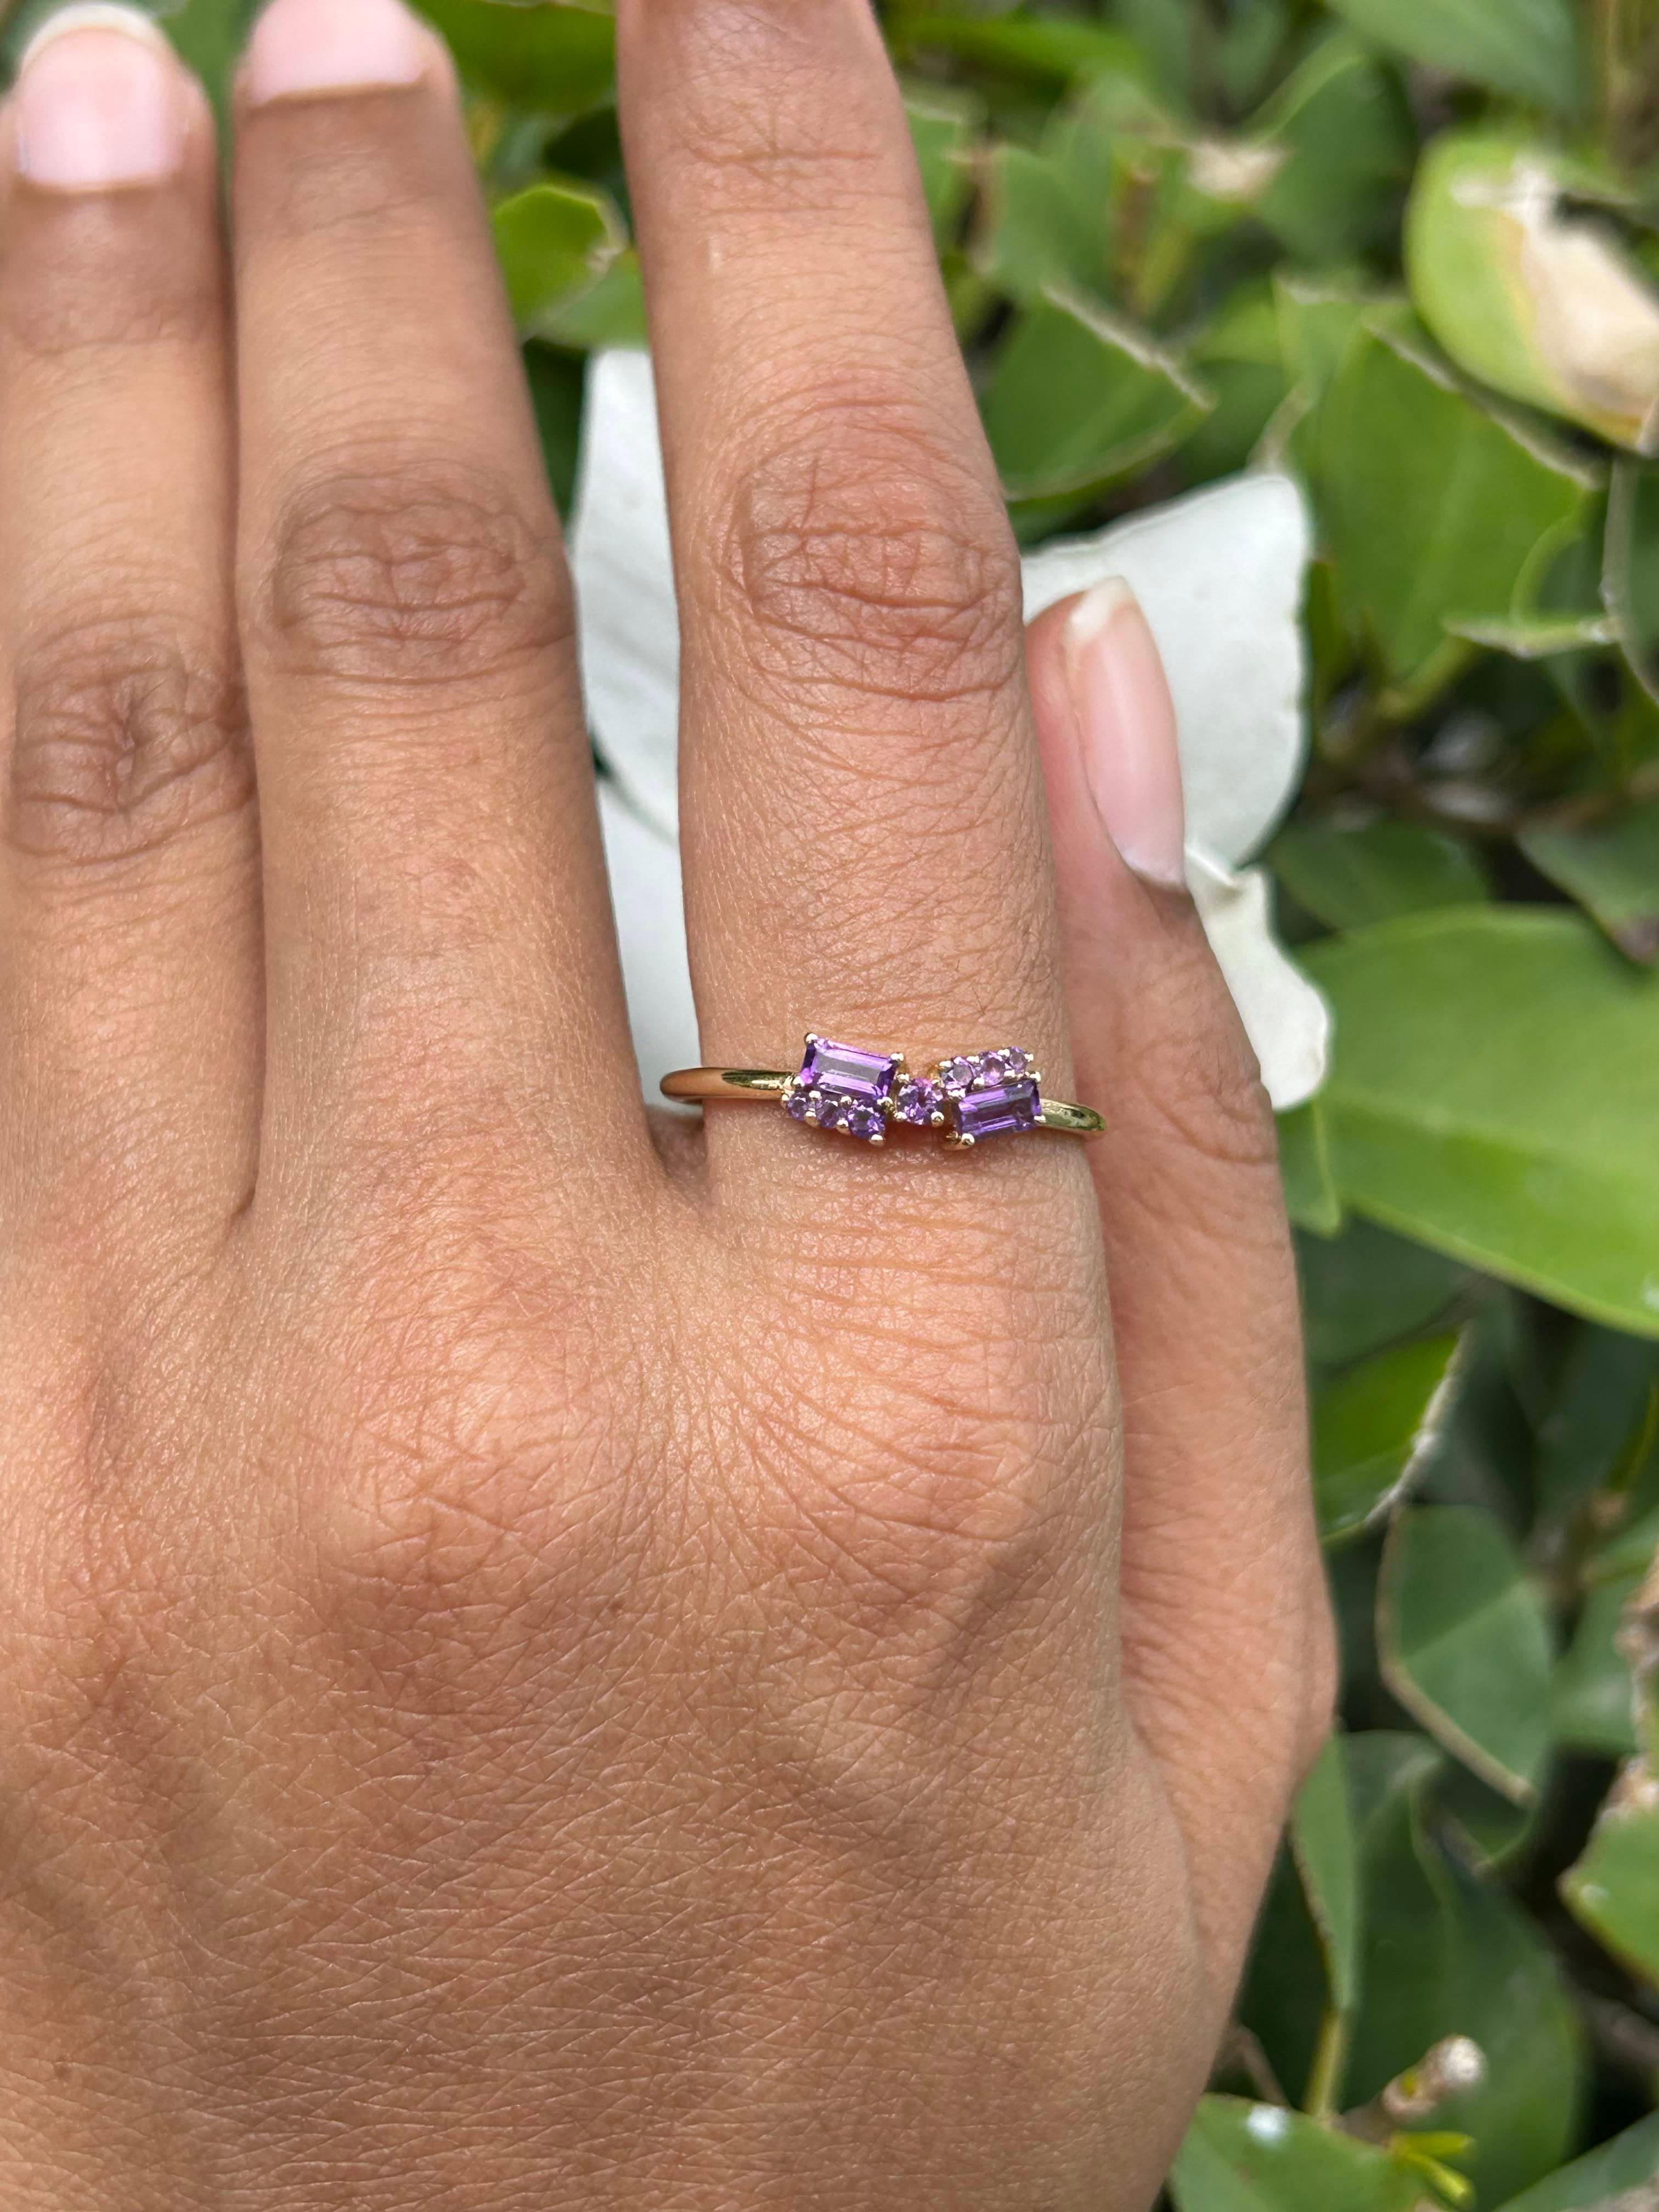 For Sale:  Everyday Wear Asymmetrical Amethyst Ring For Her in 14k Solid Yellow Gold 2